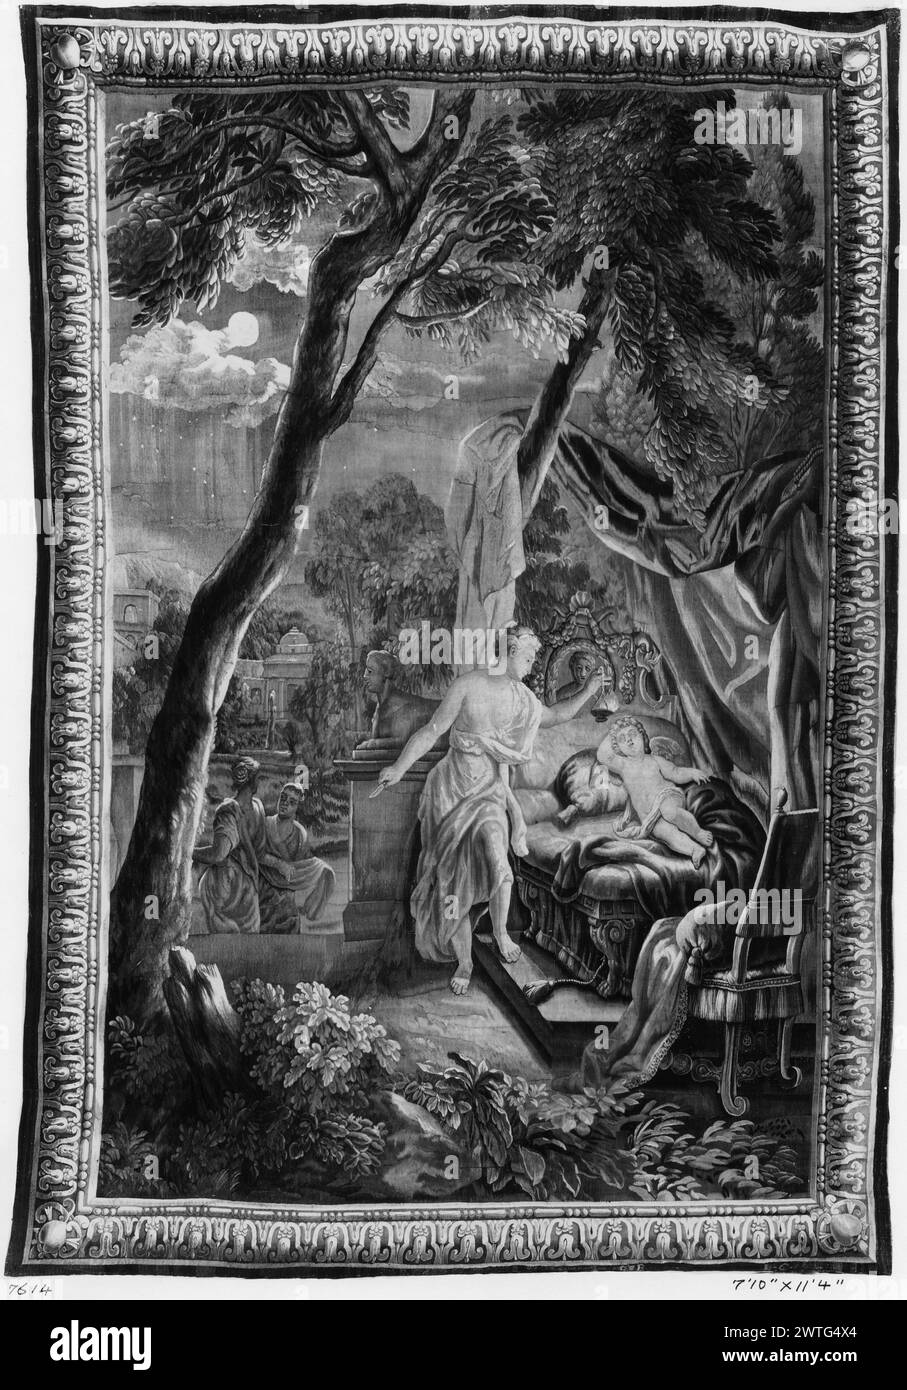 Psyche looks at sleeping Cupid. unknown c. 1700-1735 Tapestry Dimensions: H 11'4' x W 7'10' Tapestry Materials/Techniques: unknown Culture: Flemish Weaving Center: Brussels Ownership History: French & Co. purchased from Mr. Wellens, invoiced 3/31/1924. Inscriptions: City mark on lower guard, right of center; woven monogram in lower guard, right: I.C Related Works: Panels in set: GCPA 0240900-0240903 Stock Photo